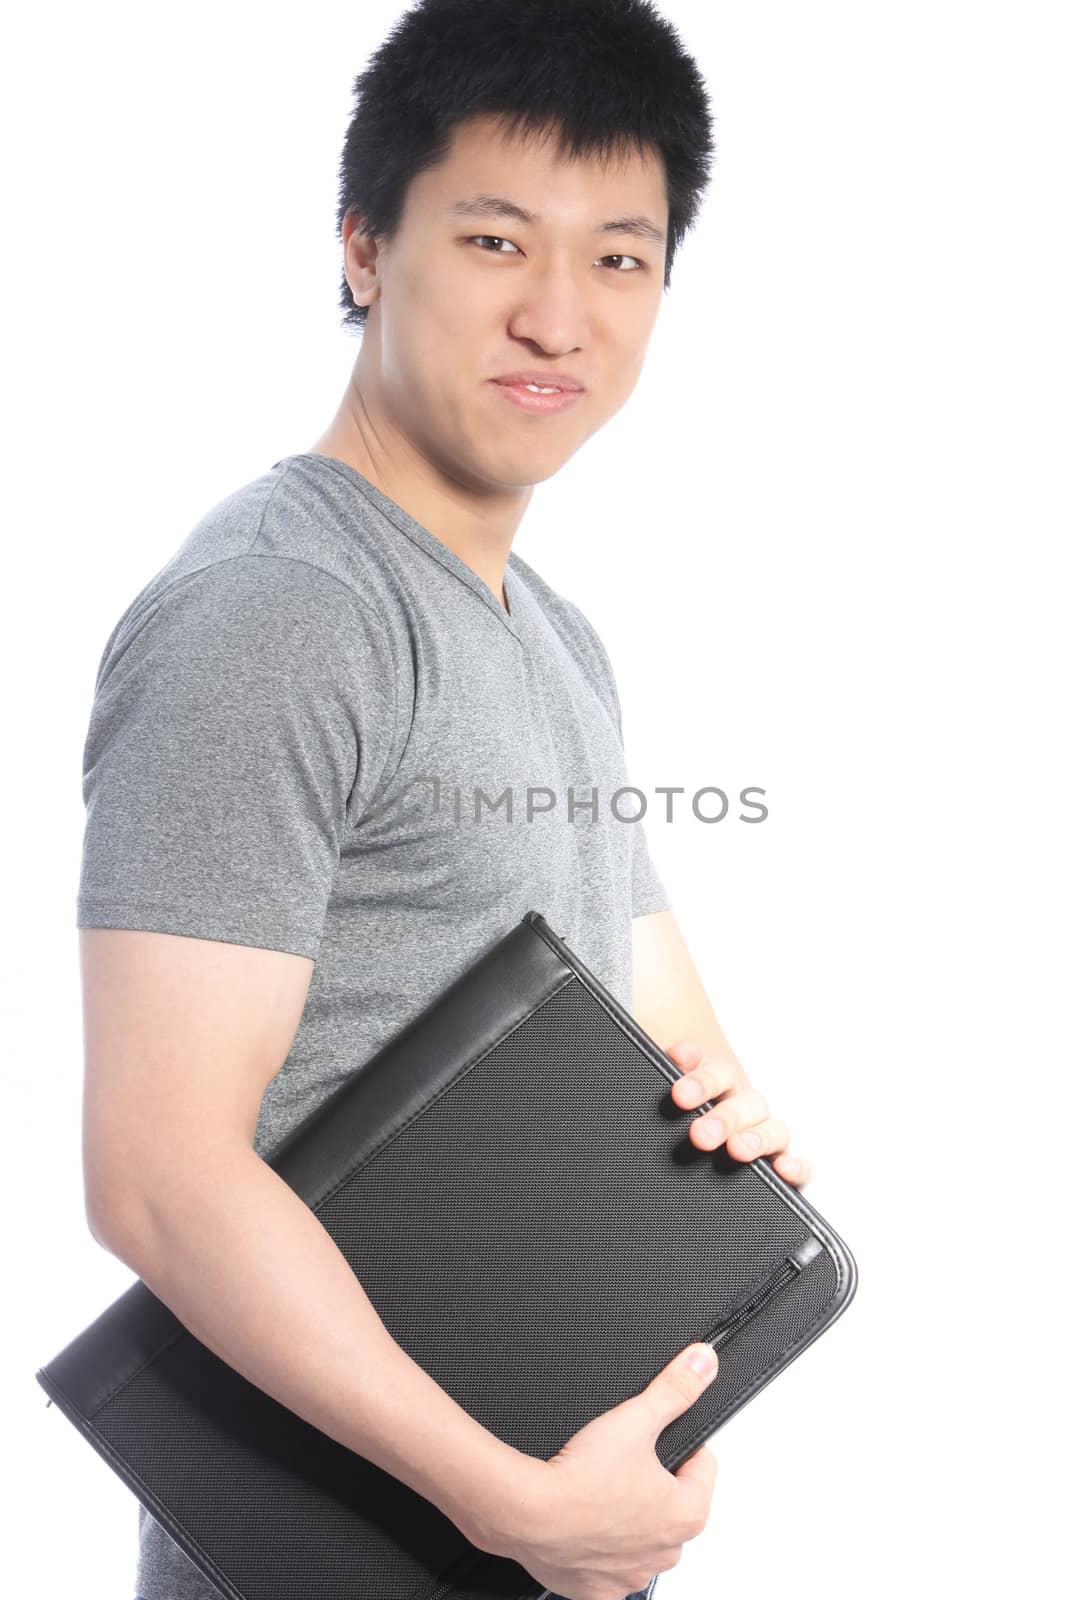 Young Asian Man Holding a Black Binder by Farina6000